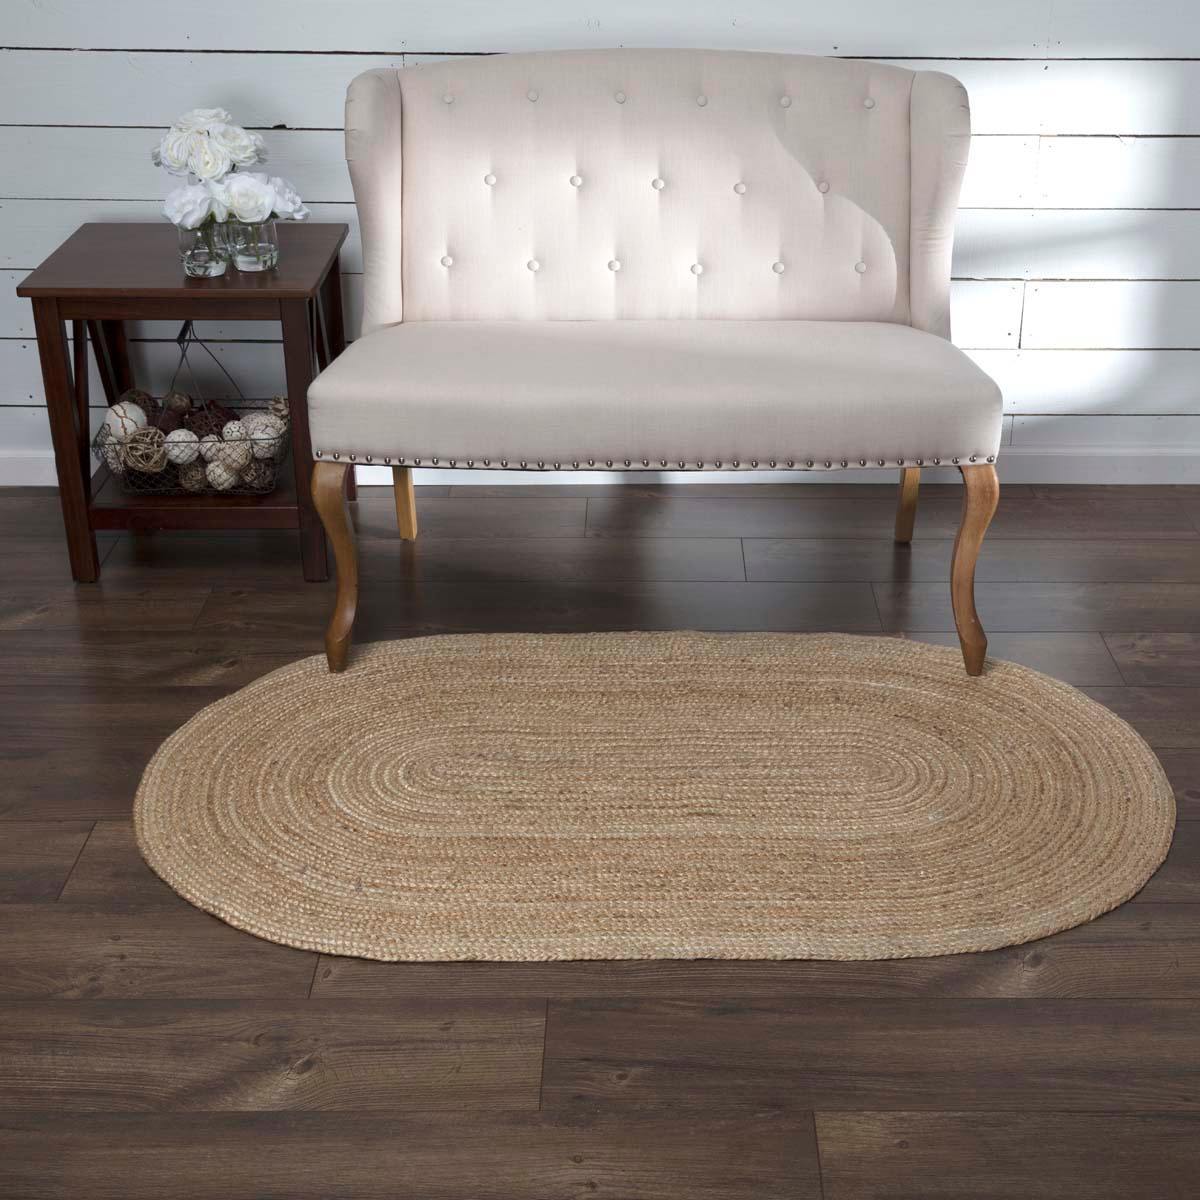 Natural Jute Braided Rug Oval 3'x5' with Rug Pad VHC Brands - The Fox Decor